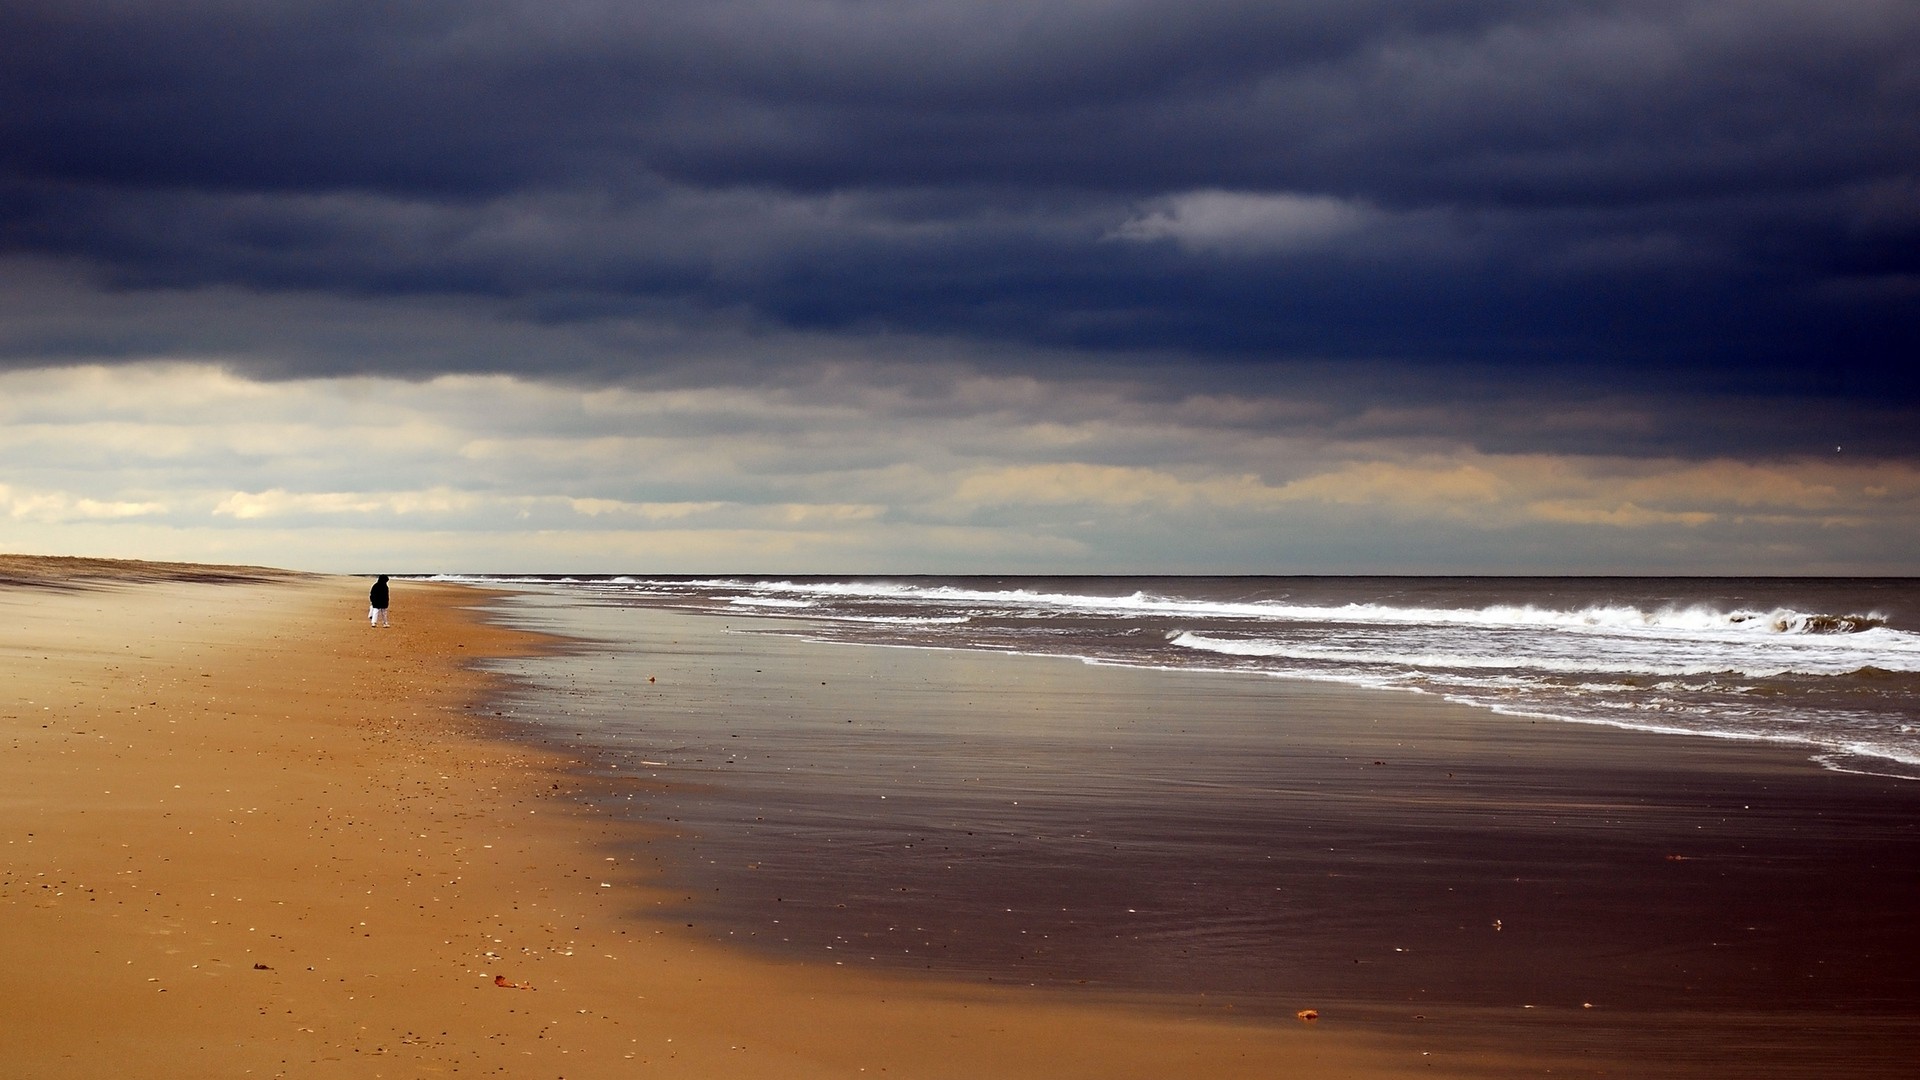 1920x1080 wallpapers: beach, sand, coast, ocean, loneliness, emptiness, cloudy, beautiful (image)